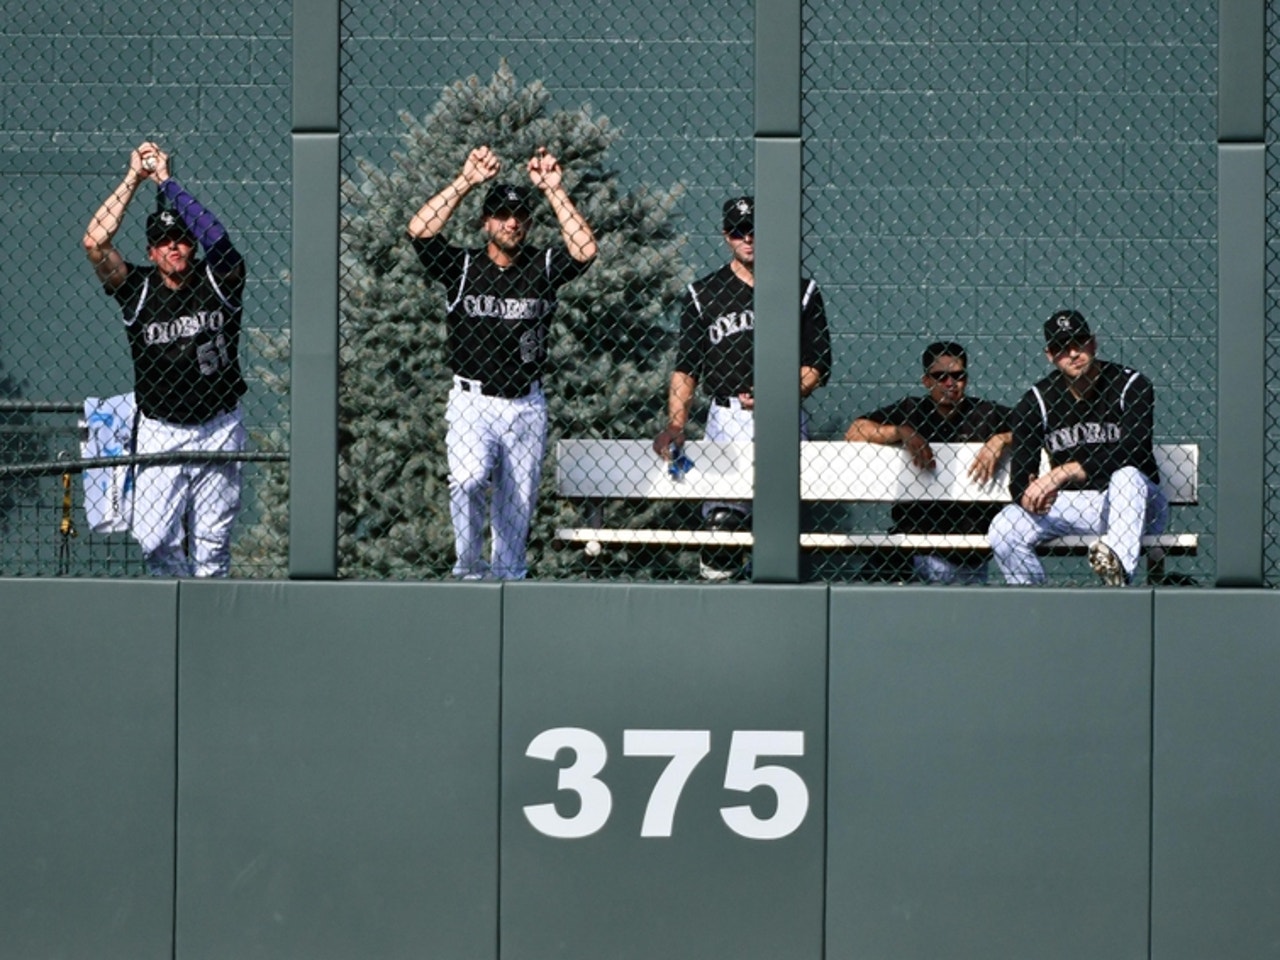 Why the Colorado Rockies will be over the .500 mark in 2020